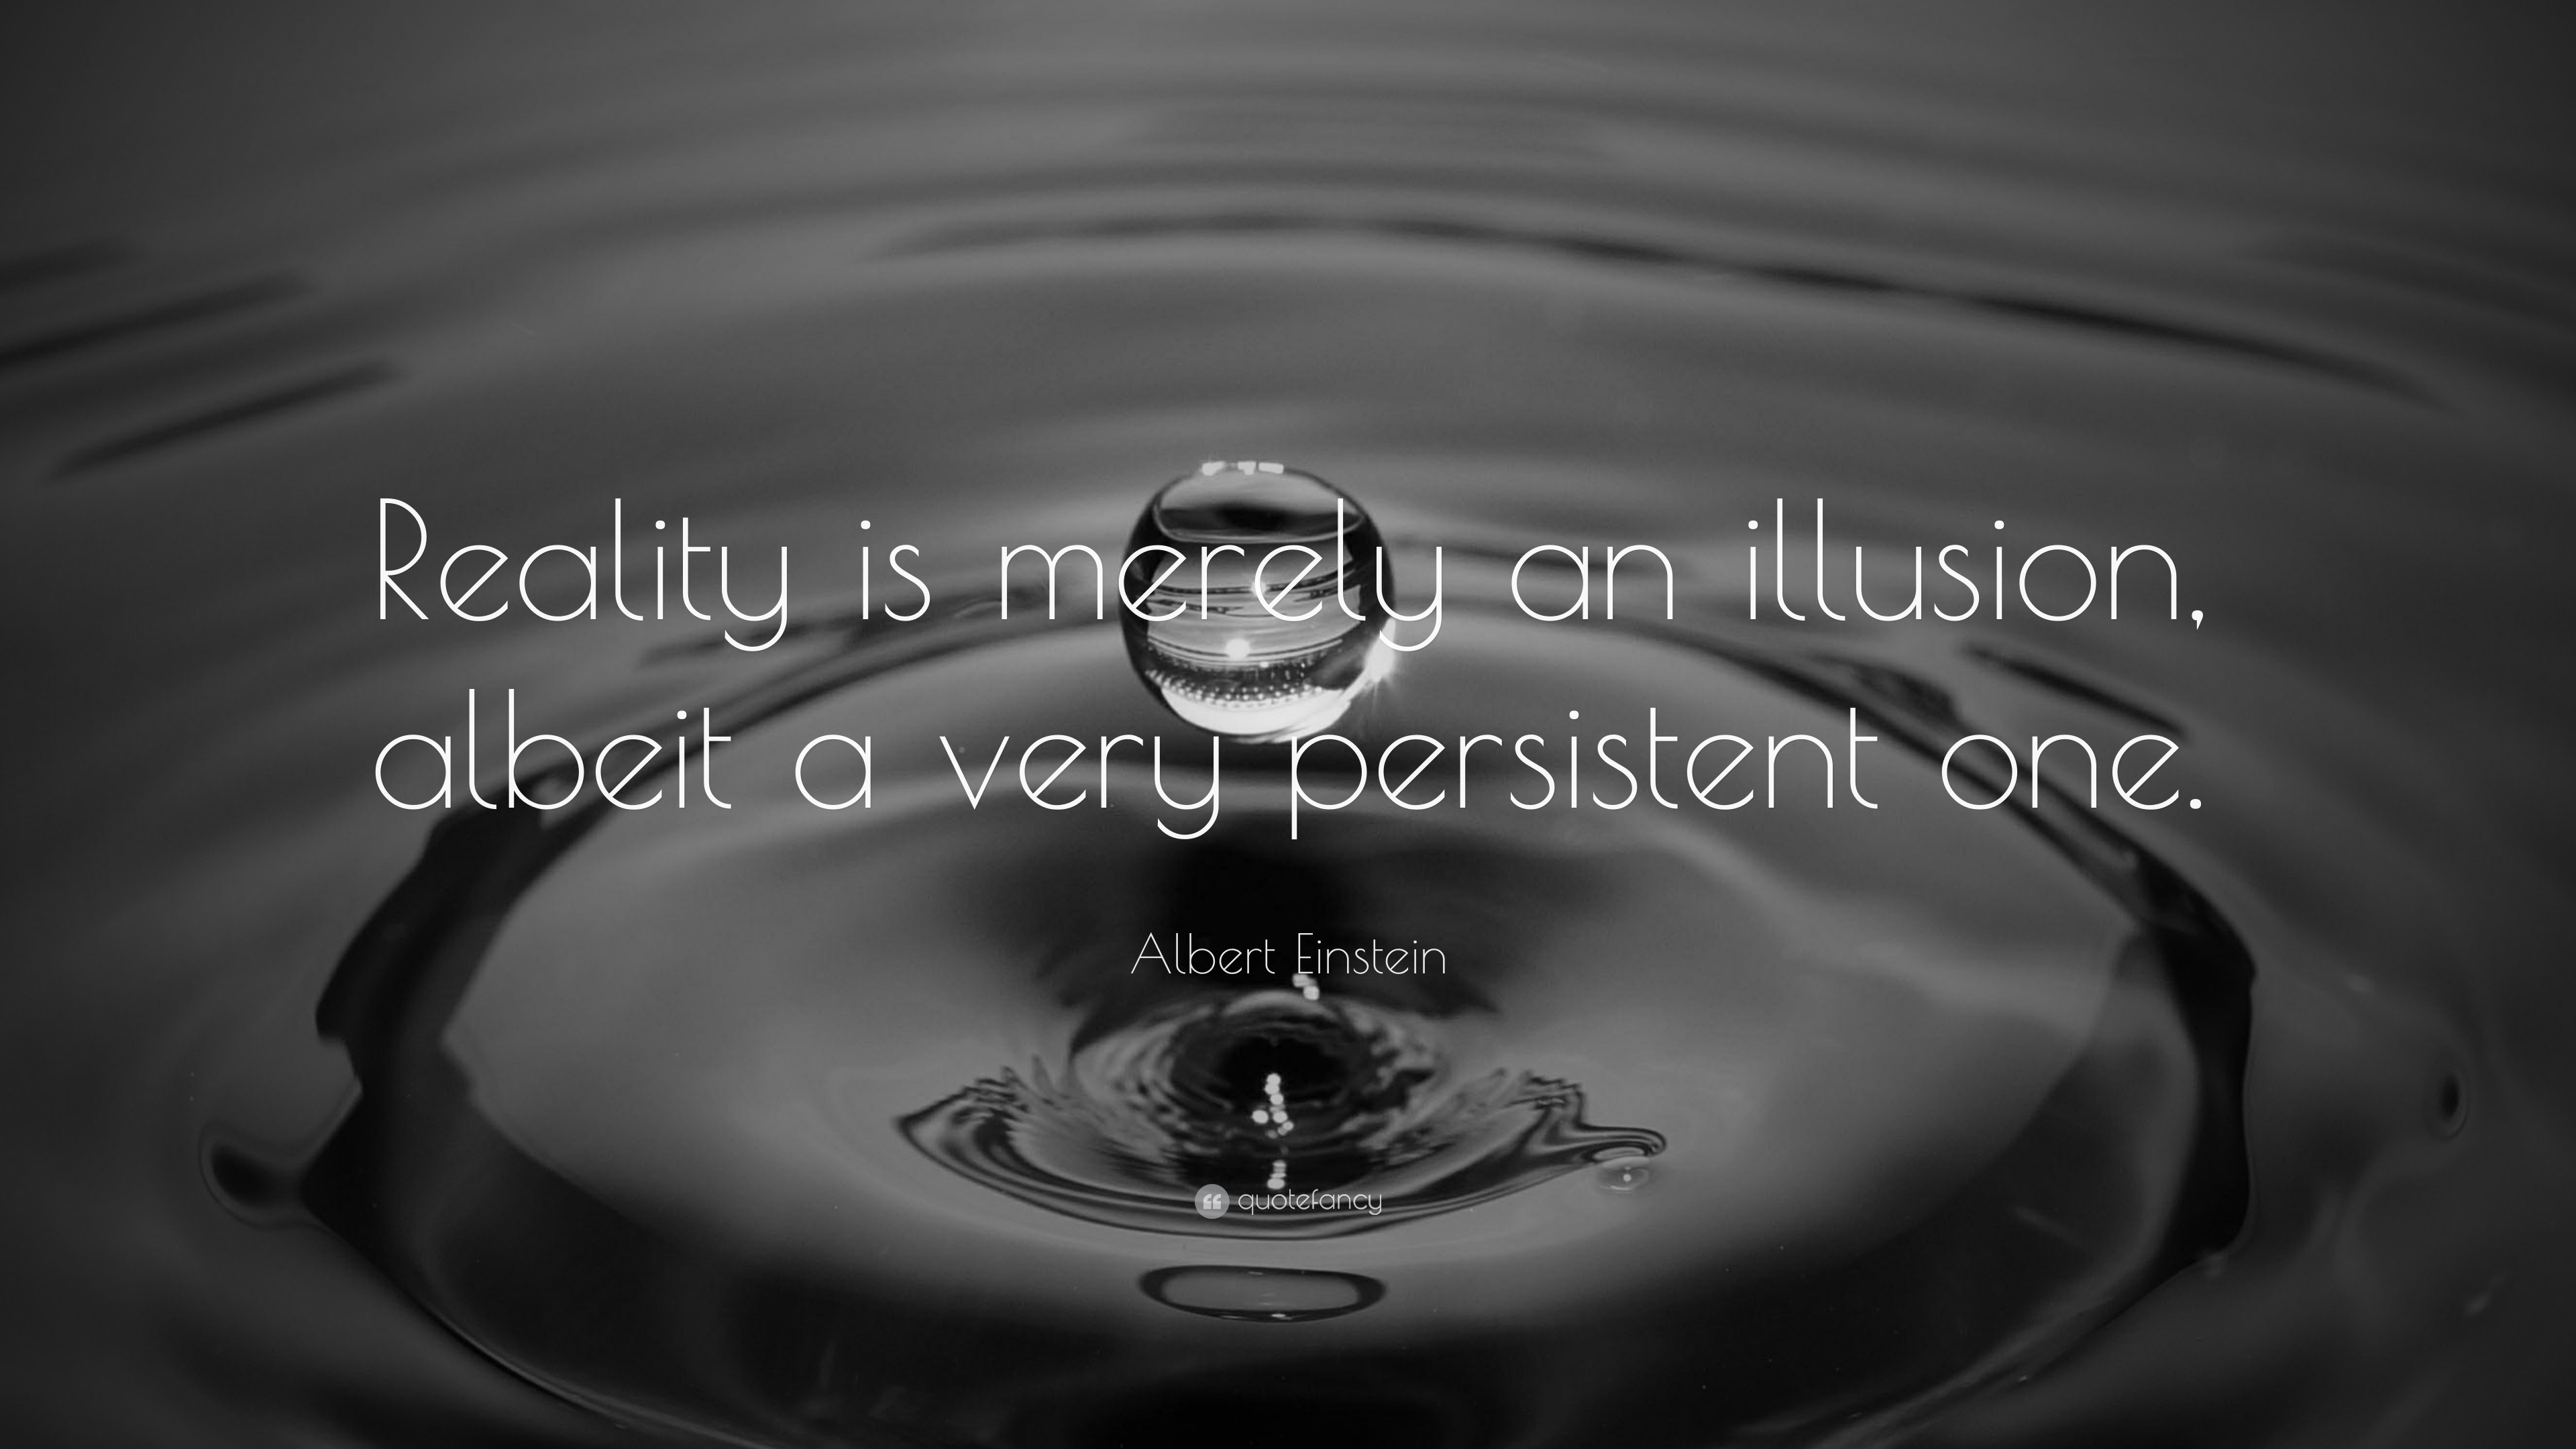 Albert Einstein Quote: “Reality is merely an illusion, albeit a very